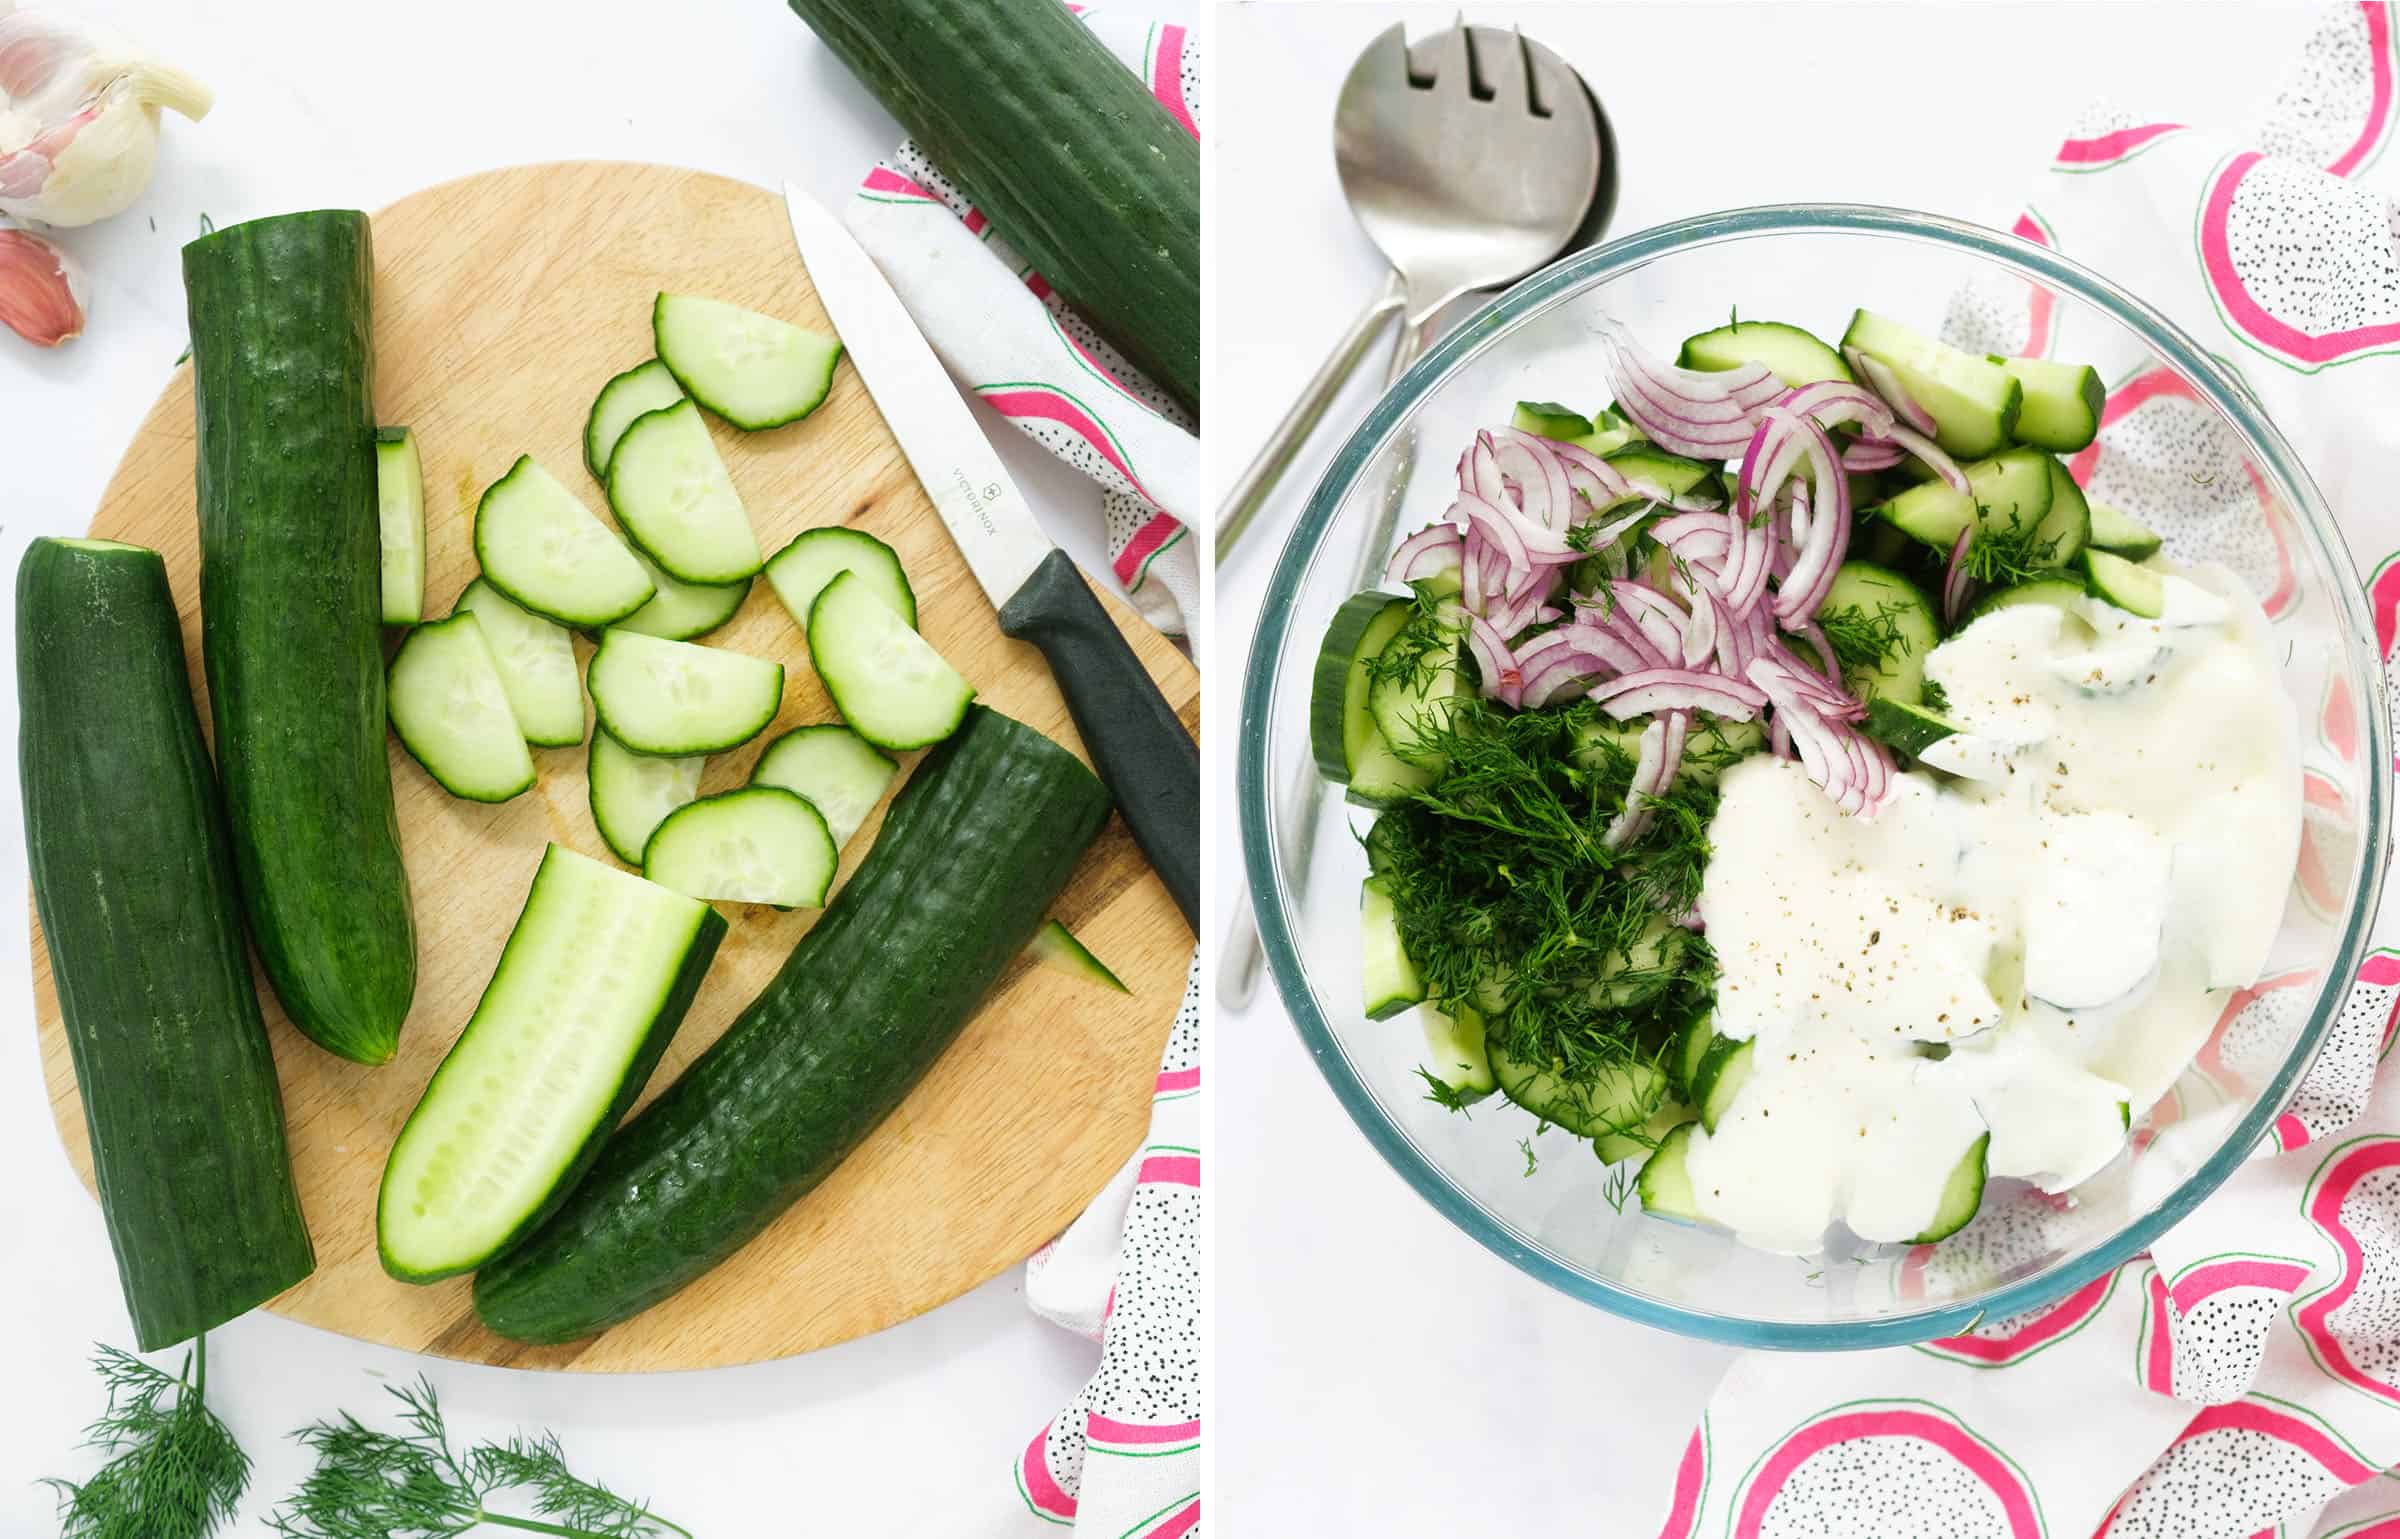 Two images showing a wooden board with sliced cucumbers and a glass bowl full of the cucumber dill salad ingredients.